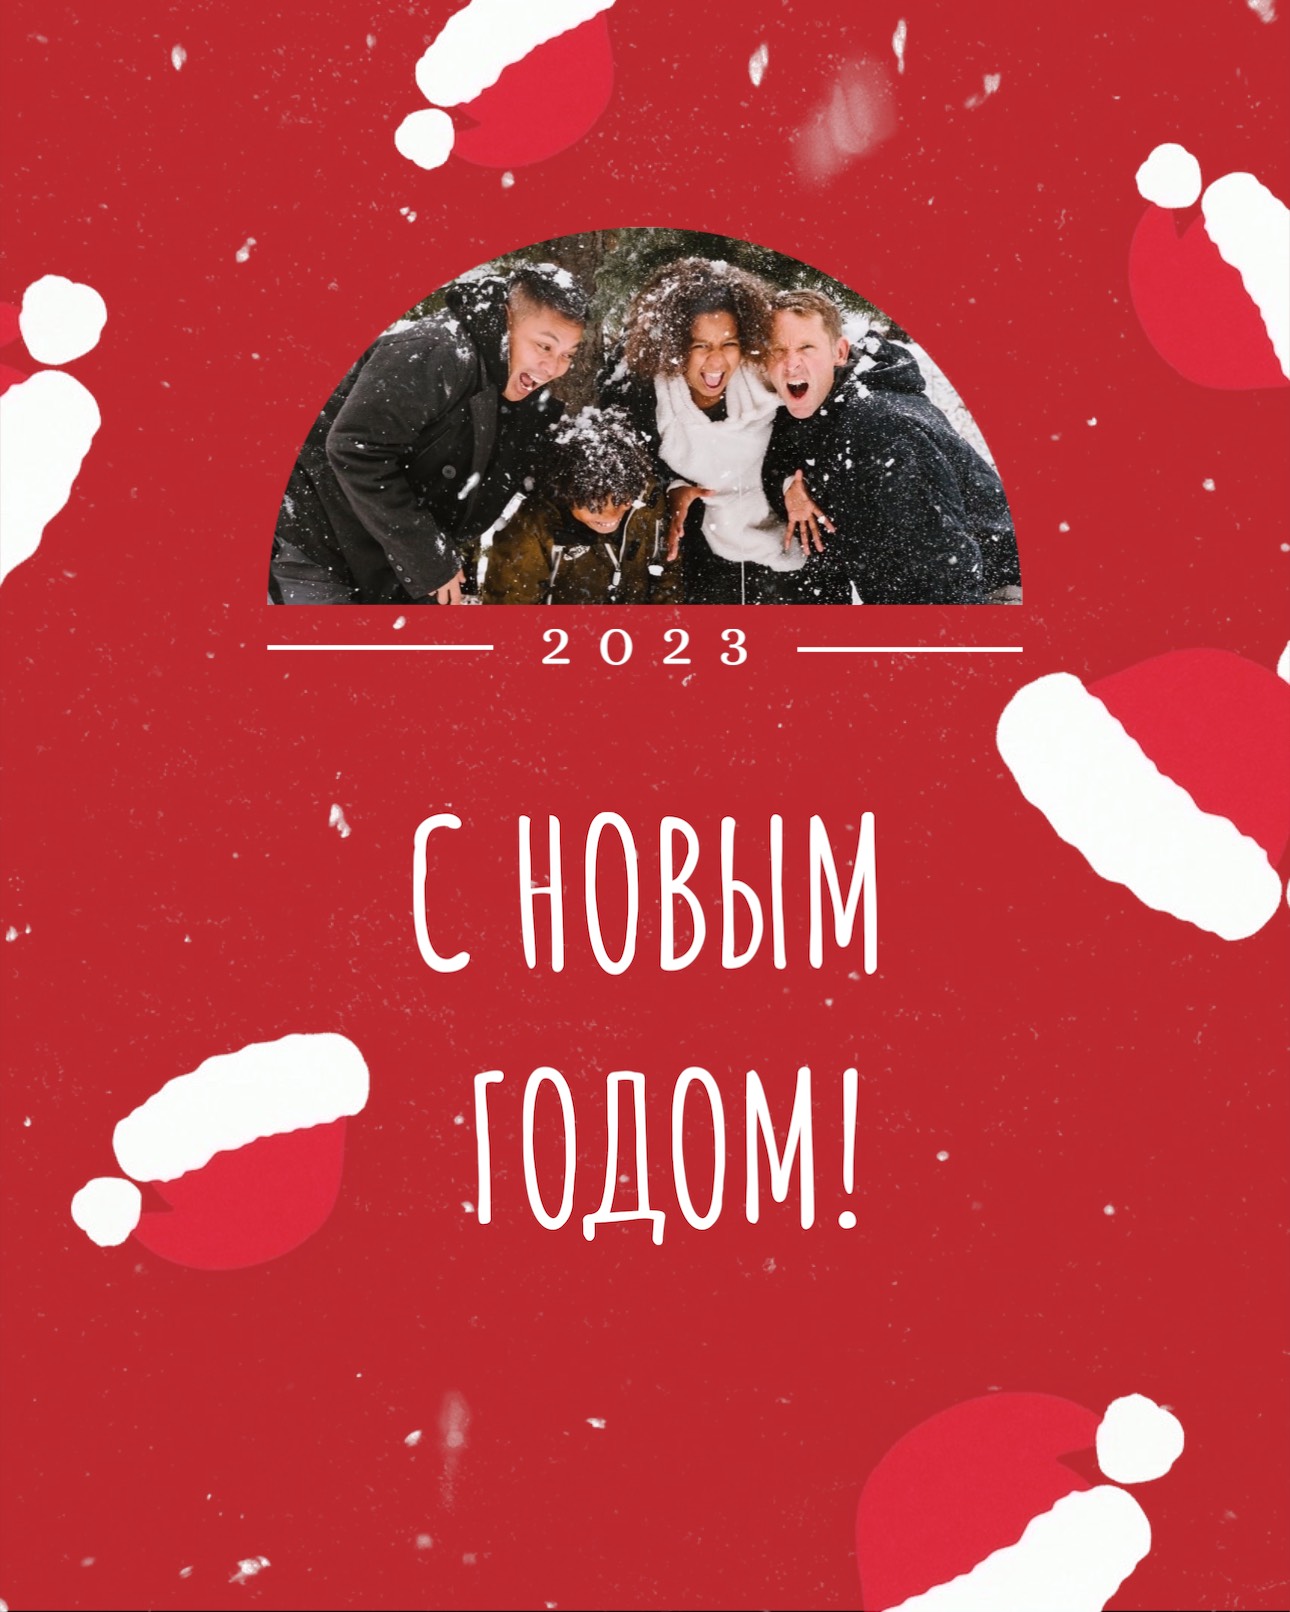 A Red Background With White Snowflakes And A Photo Of Two People Template